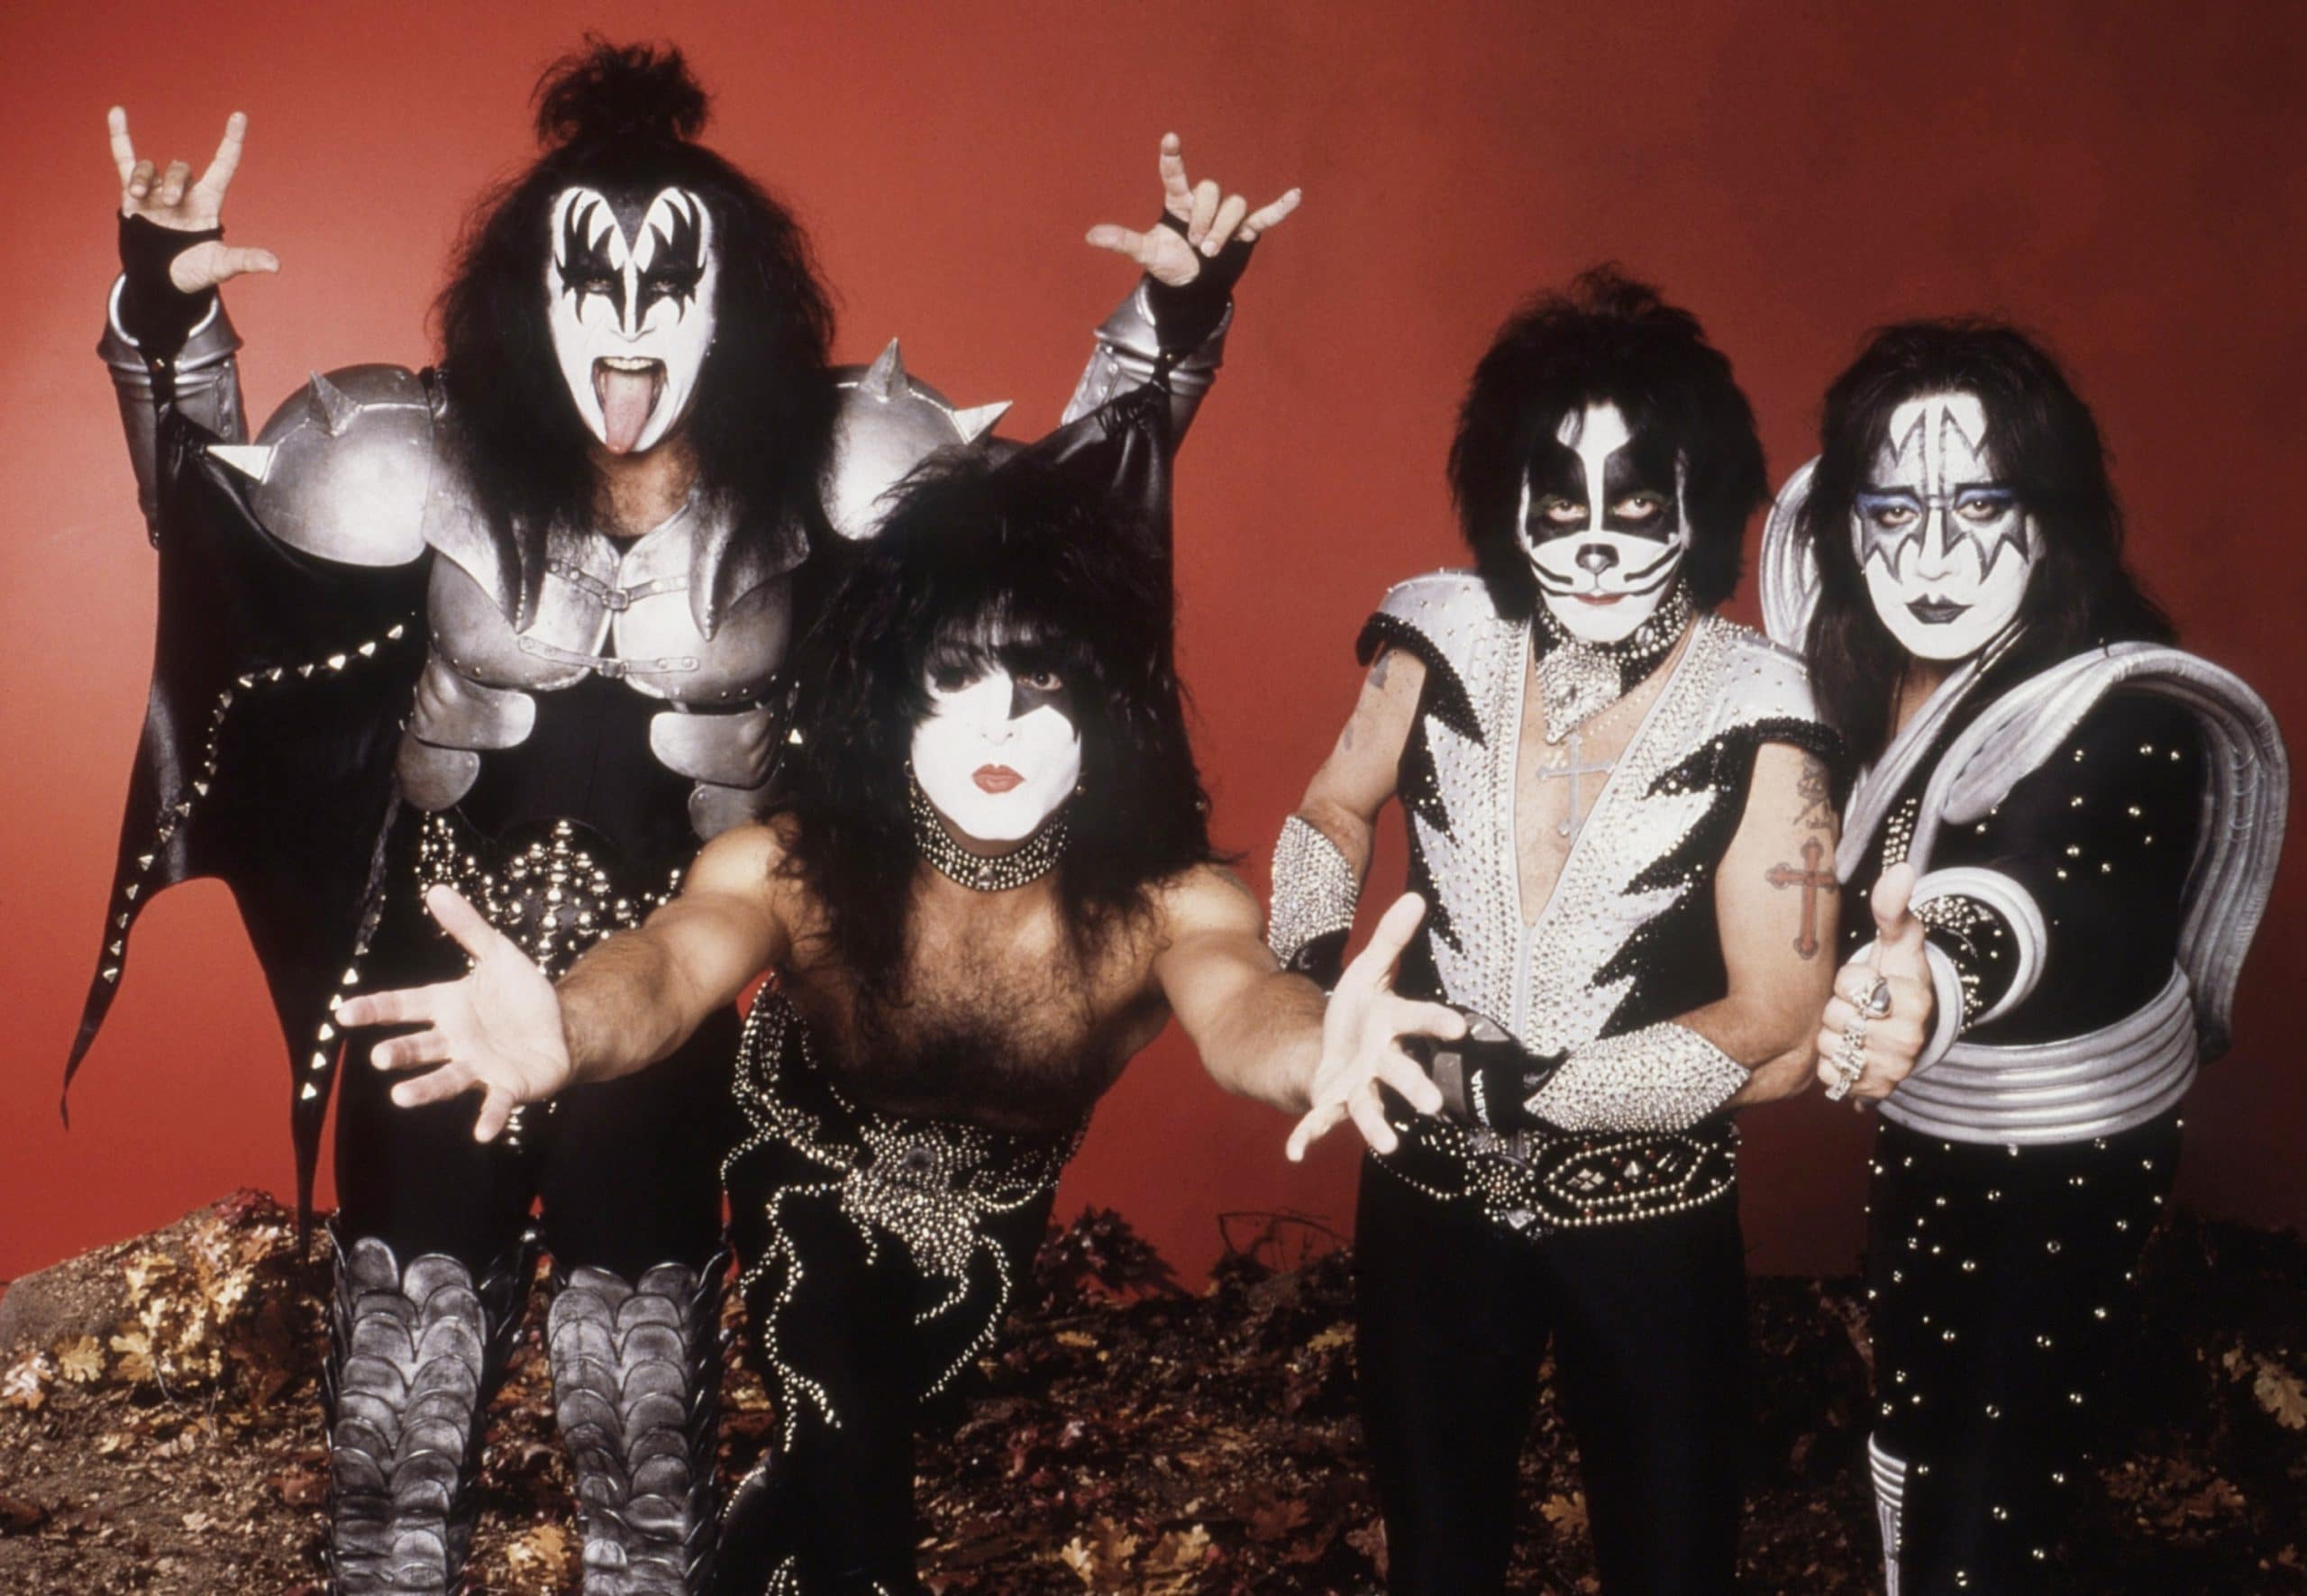 Kiss, from left: Gene Simmons, Paul Stanley, Peter Criss, Ace Frehley, circa 1998